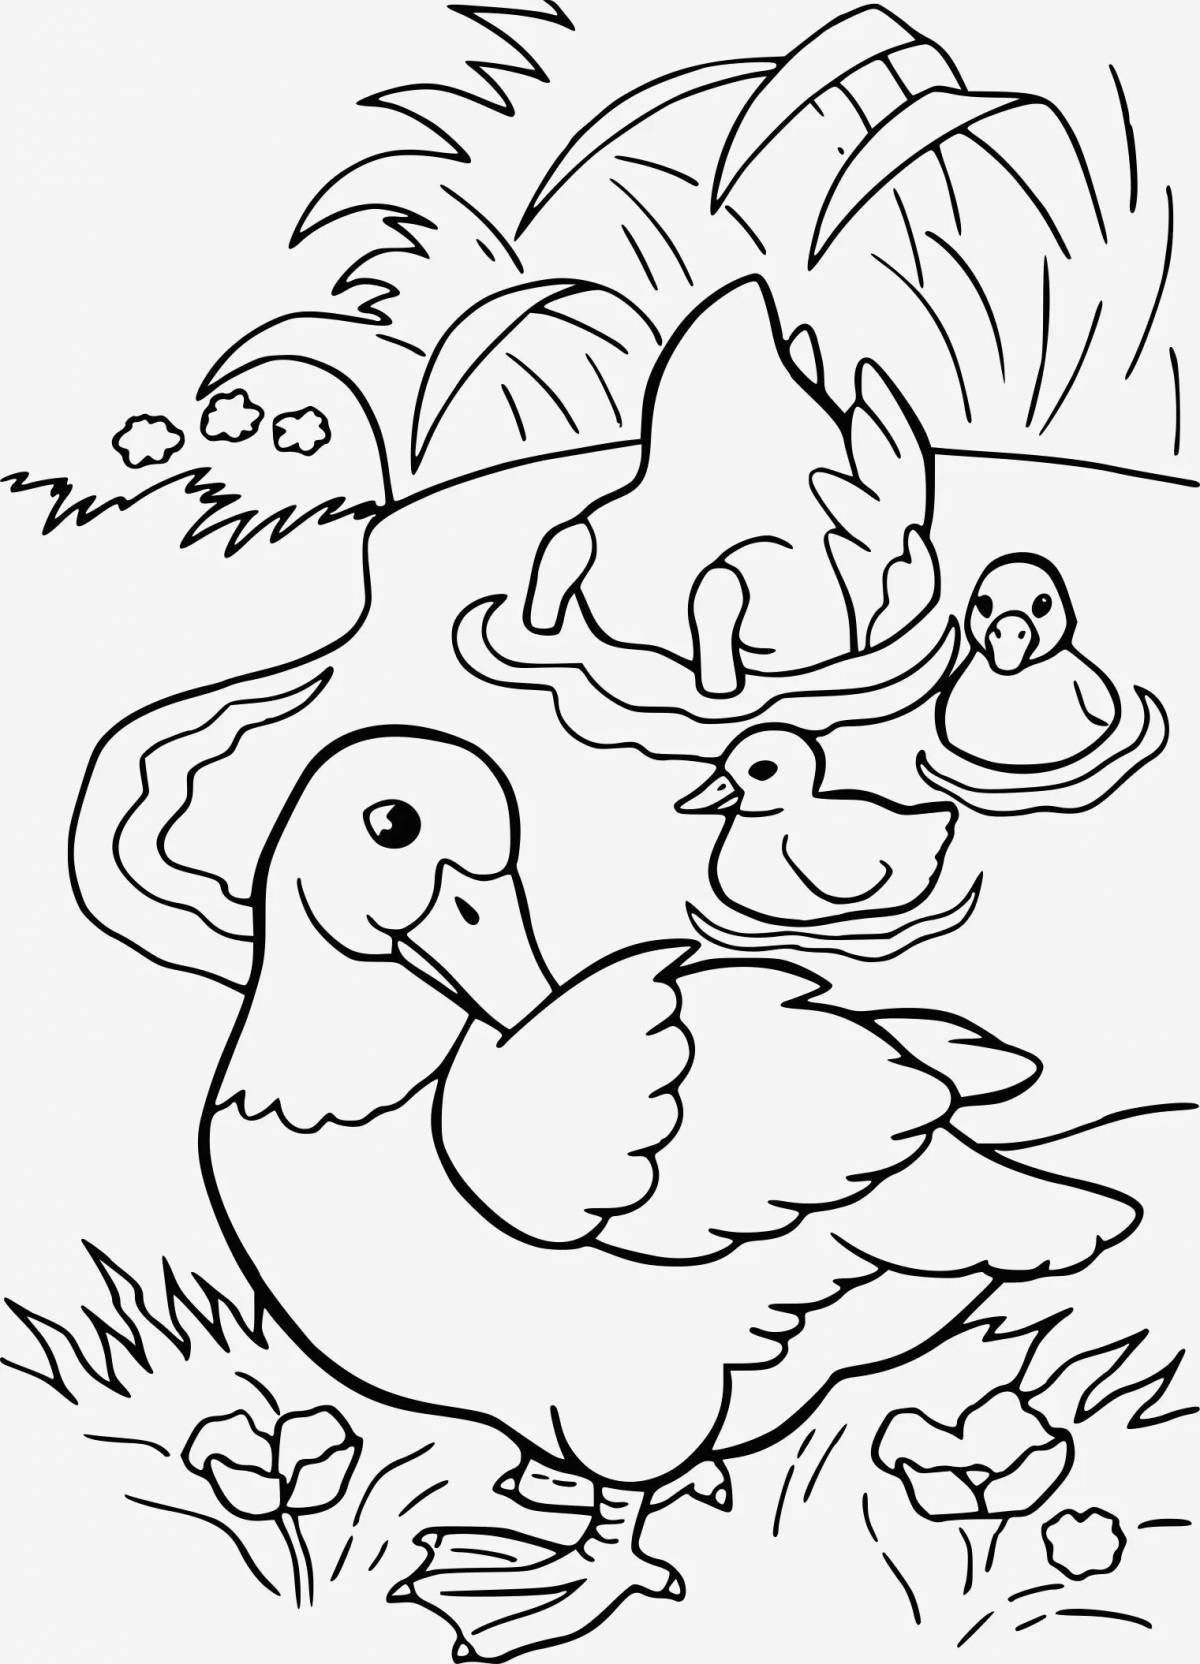 Colorful bird coloring page for kids